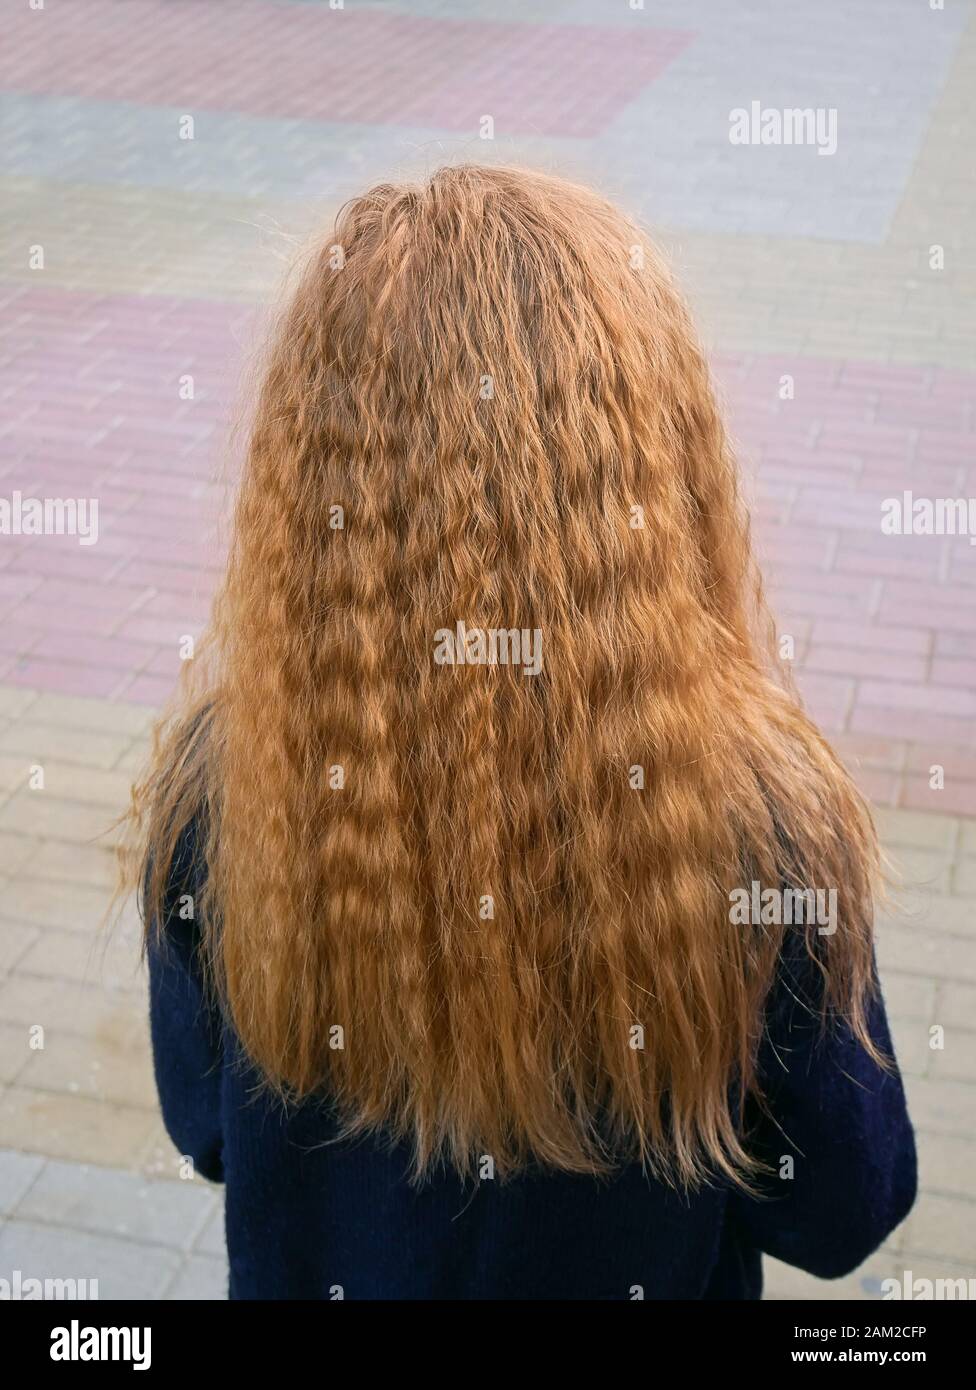 Little schoolgirl with long flowing wavy blond hair on the sidewalk of colored tiles, back view Stock Photo